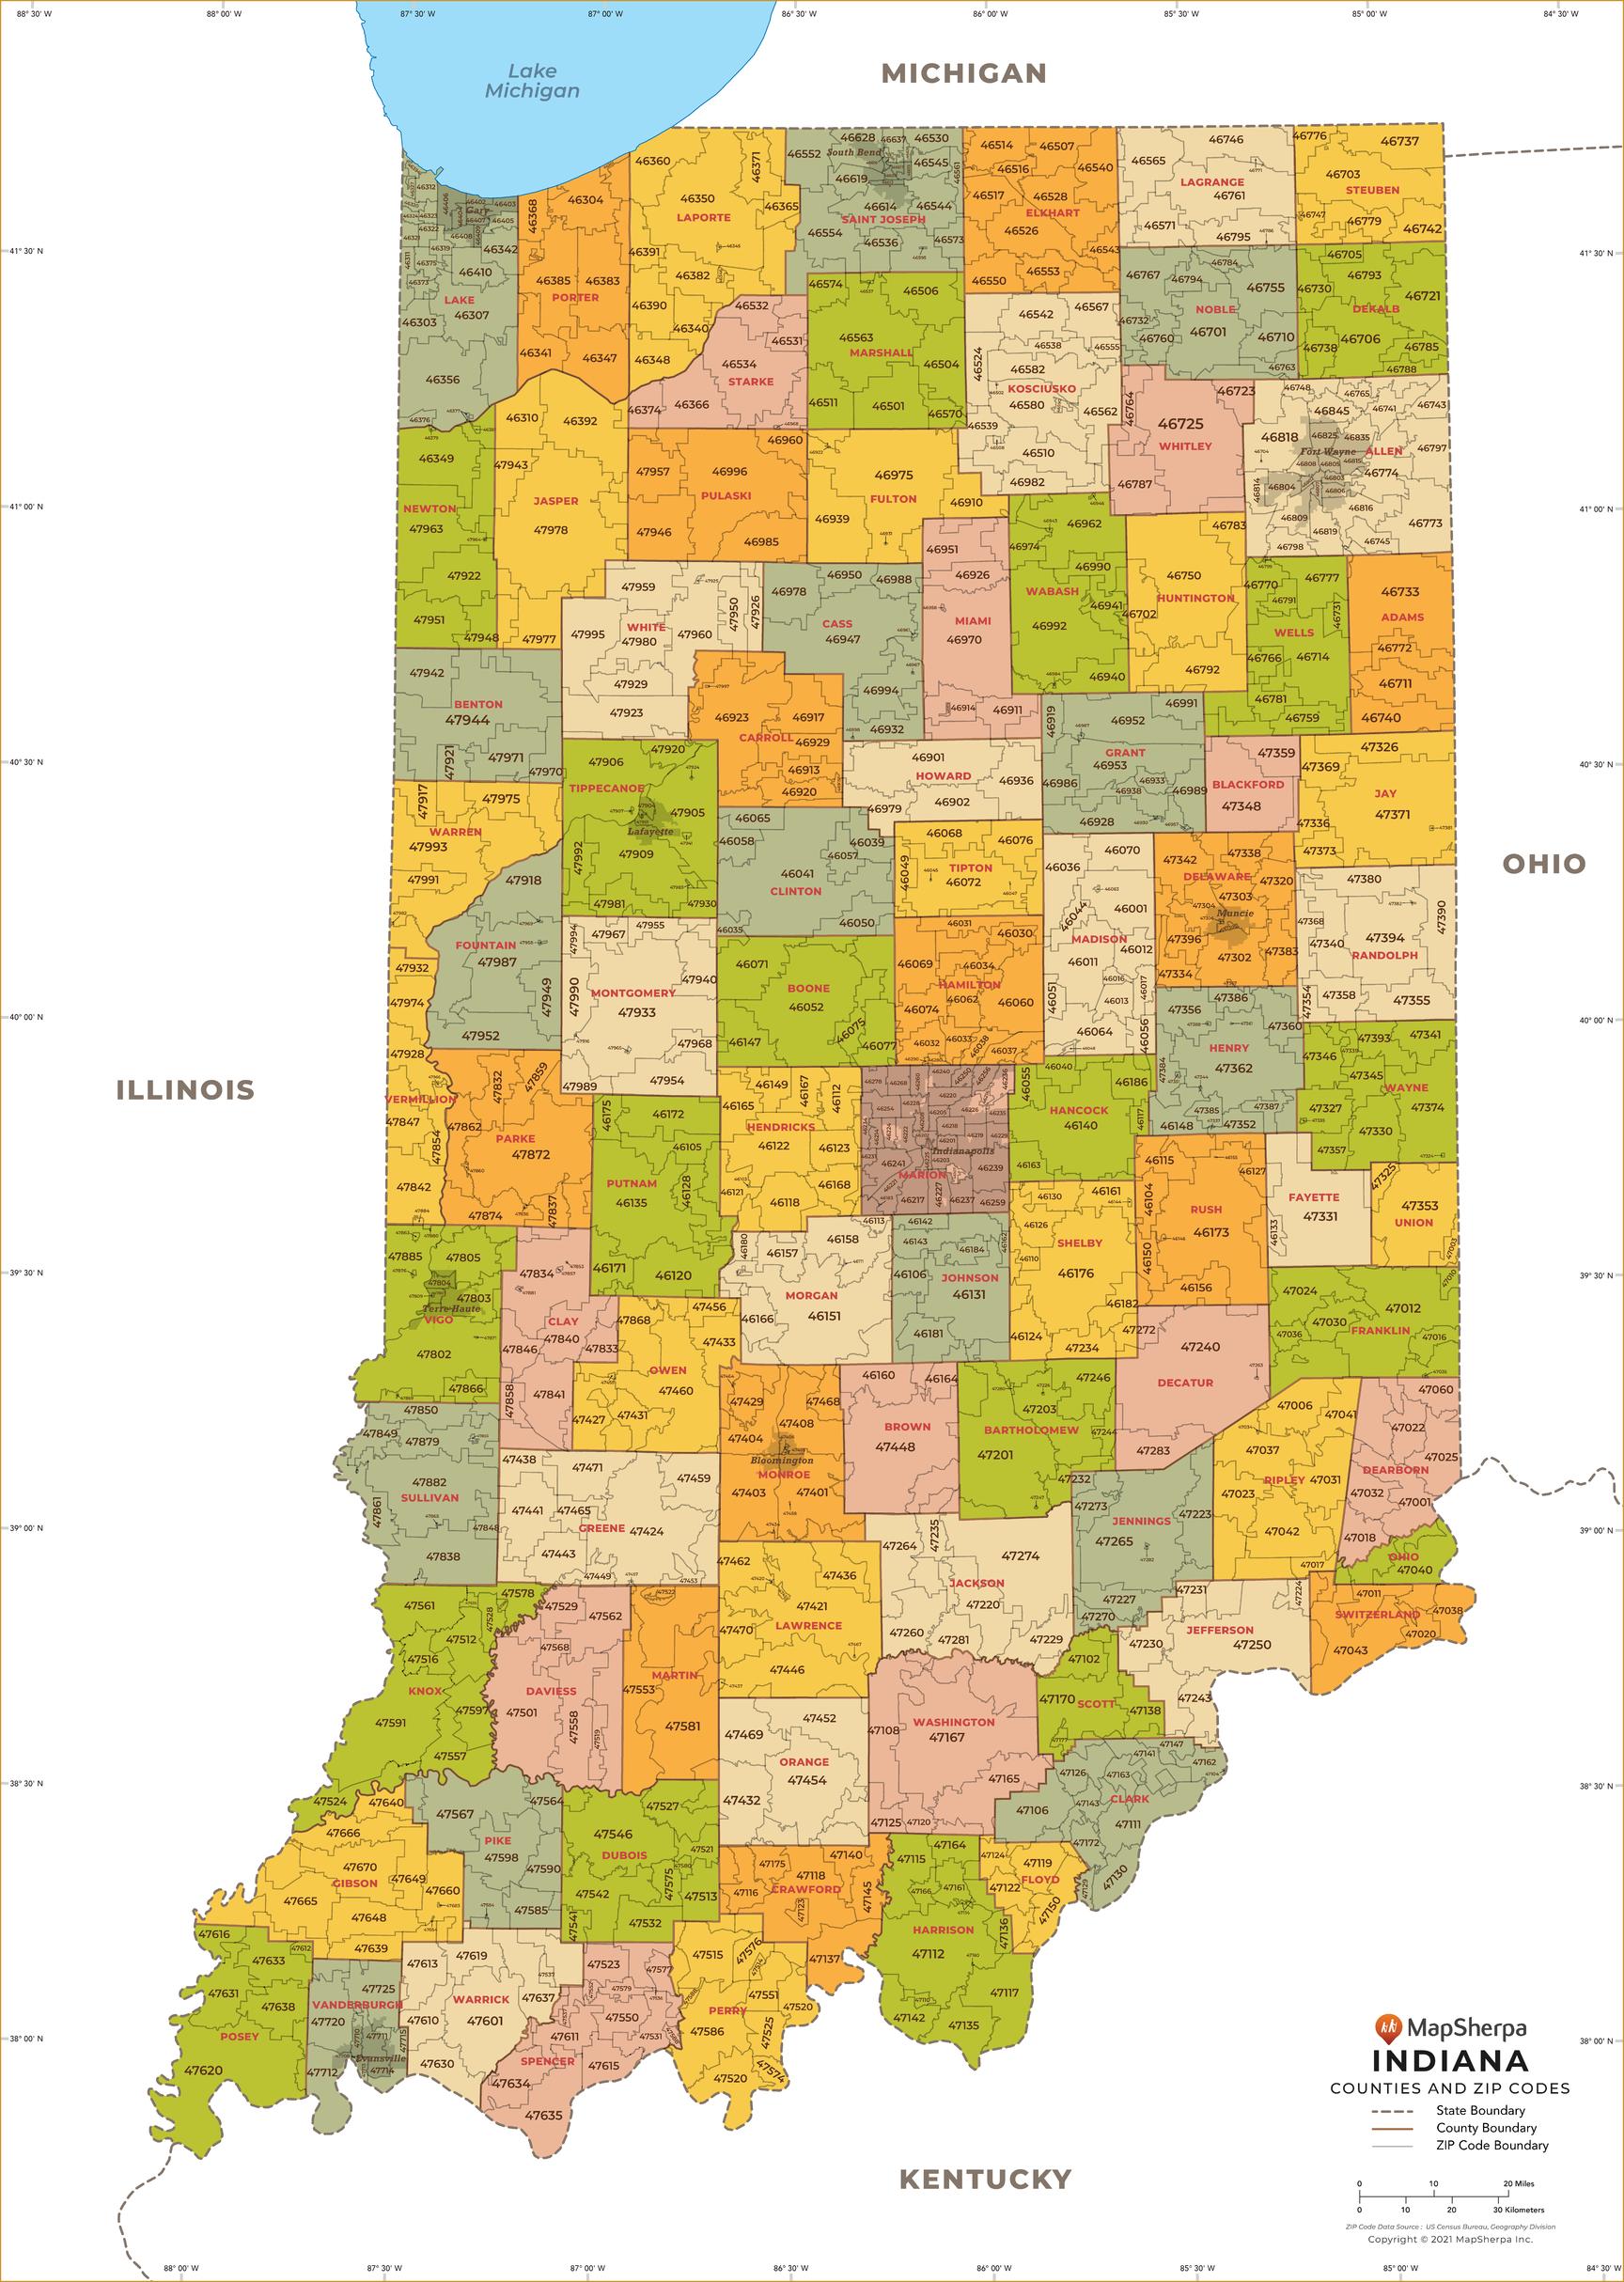 Indiana ZIP Code Map with Counties by MapSherpa - The Map Shop